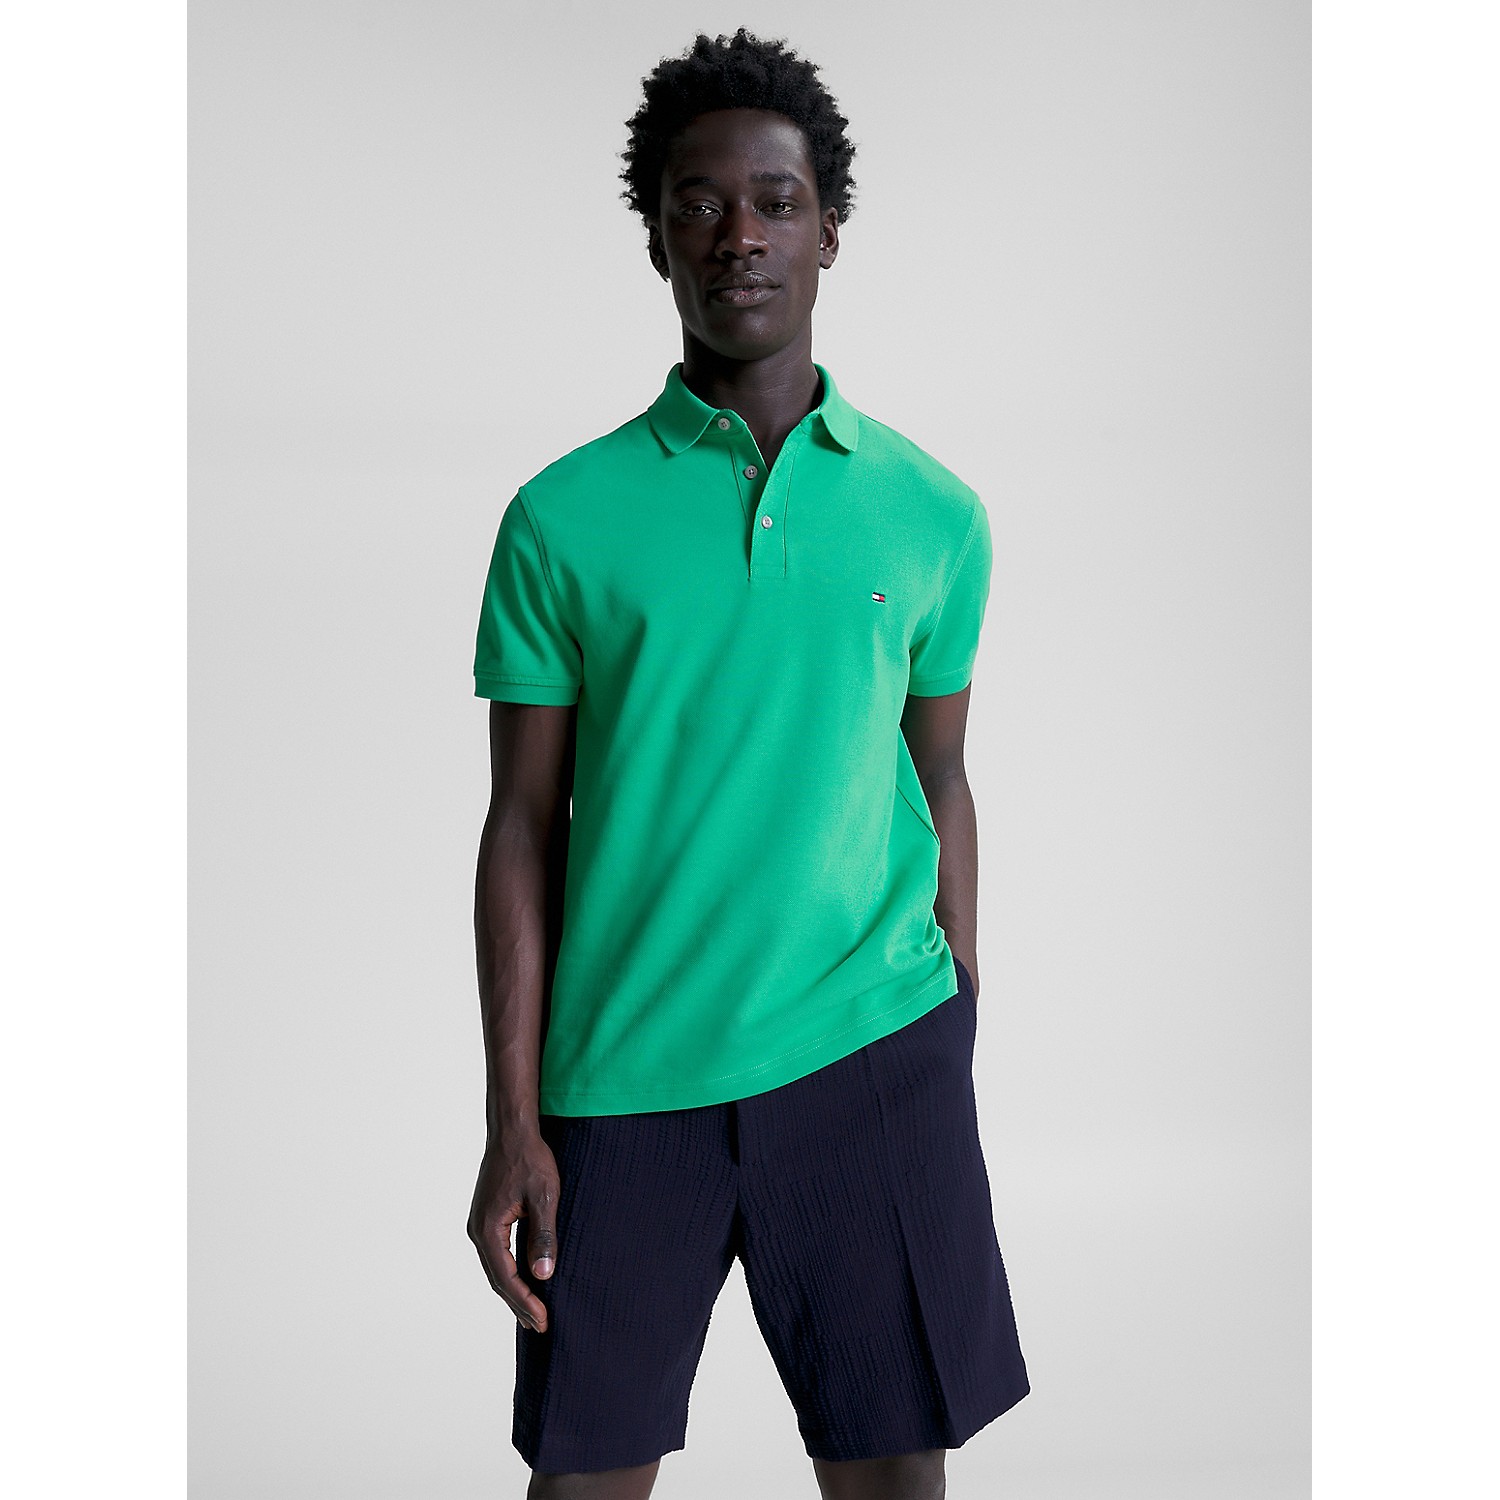 TOMMY HILFIGER Slim Fit 1985 Polo